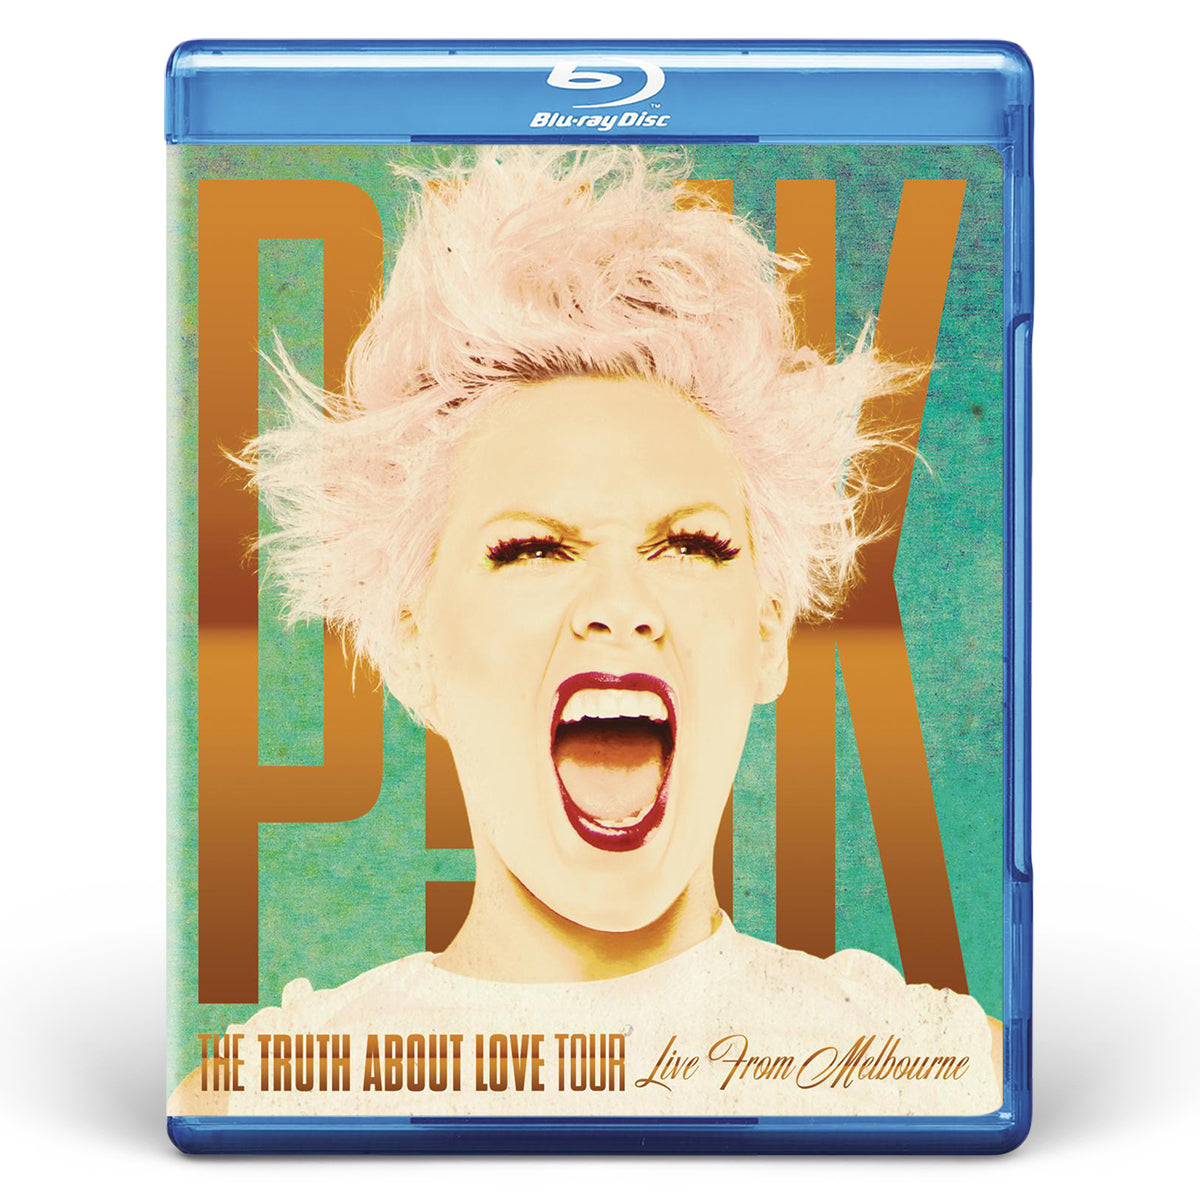 The Truth About Love Tour: Live From Melbourne Blu-Ray [Explicit]